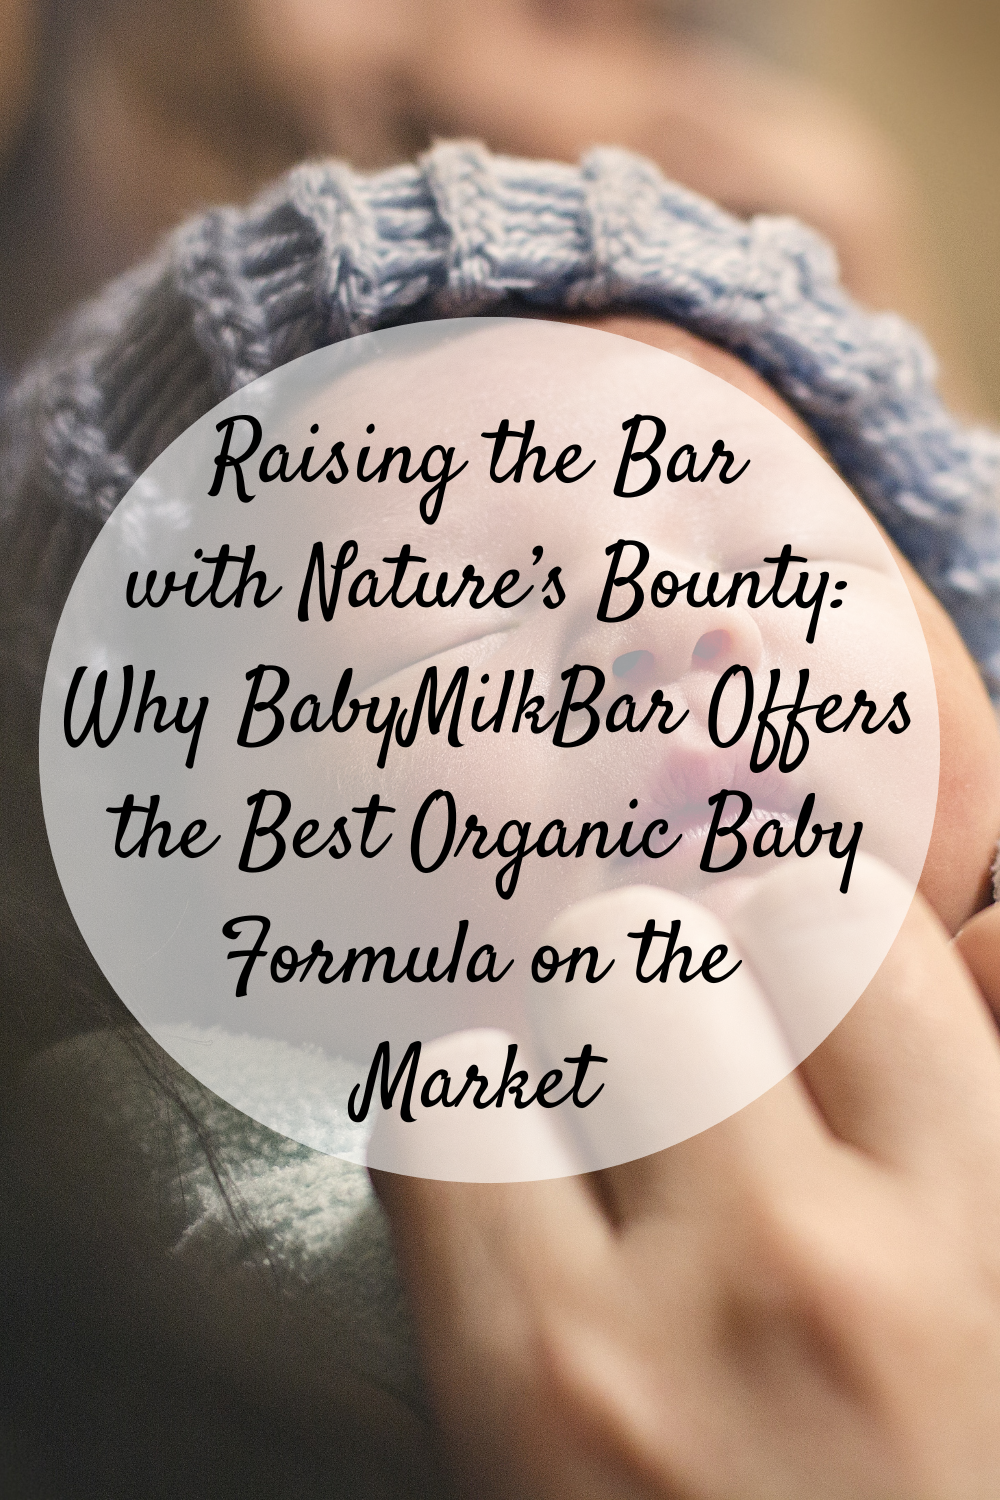 https://momandmore.com/wp-content/uploads/2023/07/Raising-the-Bar-with-Natures-Bounty-Why-BabyMilkBar-Offers-the-Best-Organic-Baby-Formula-on-the-Market-.png